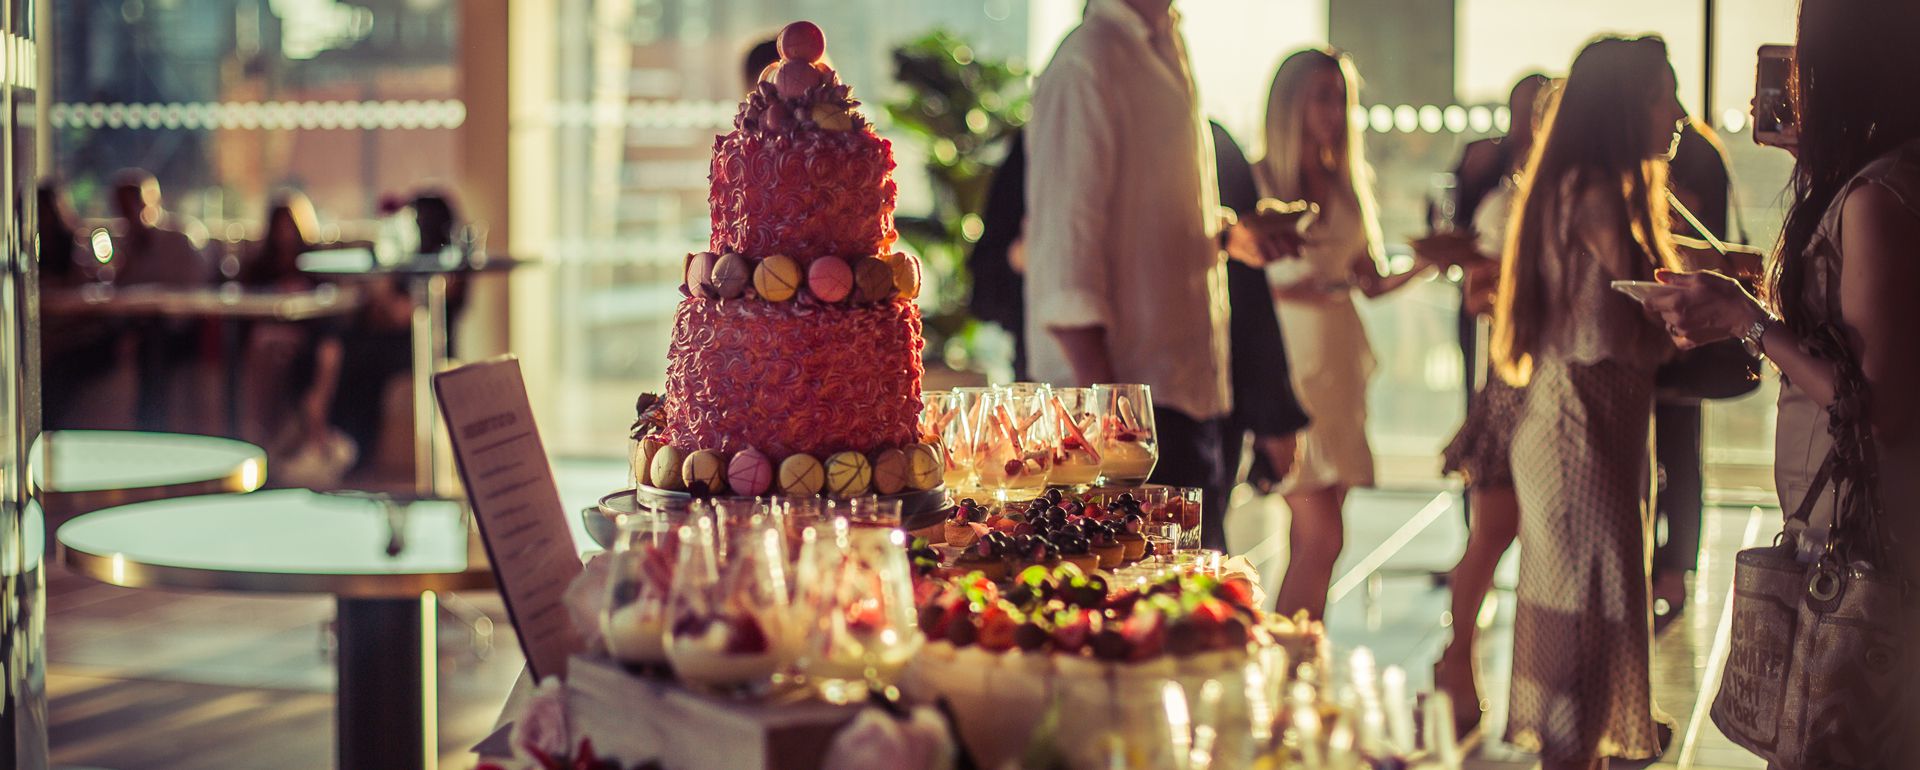 Large cake at an event